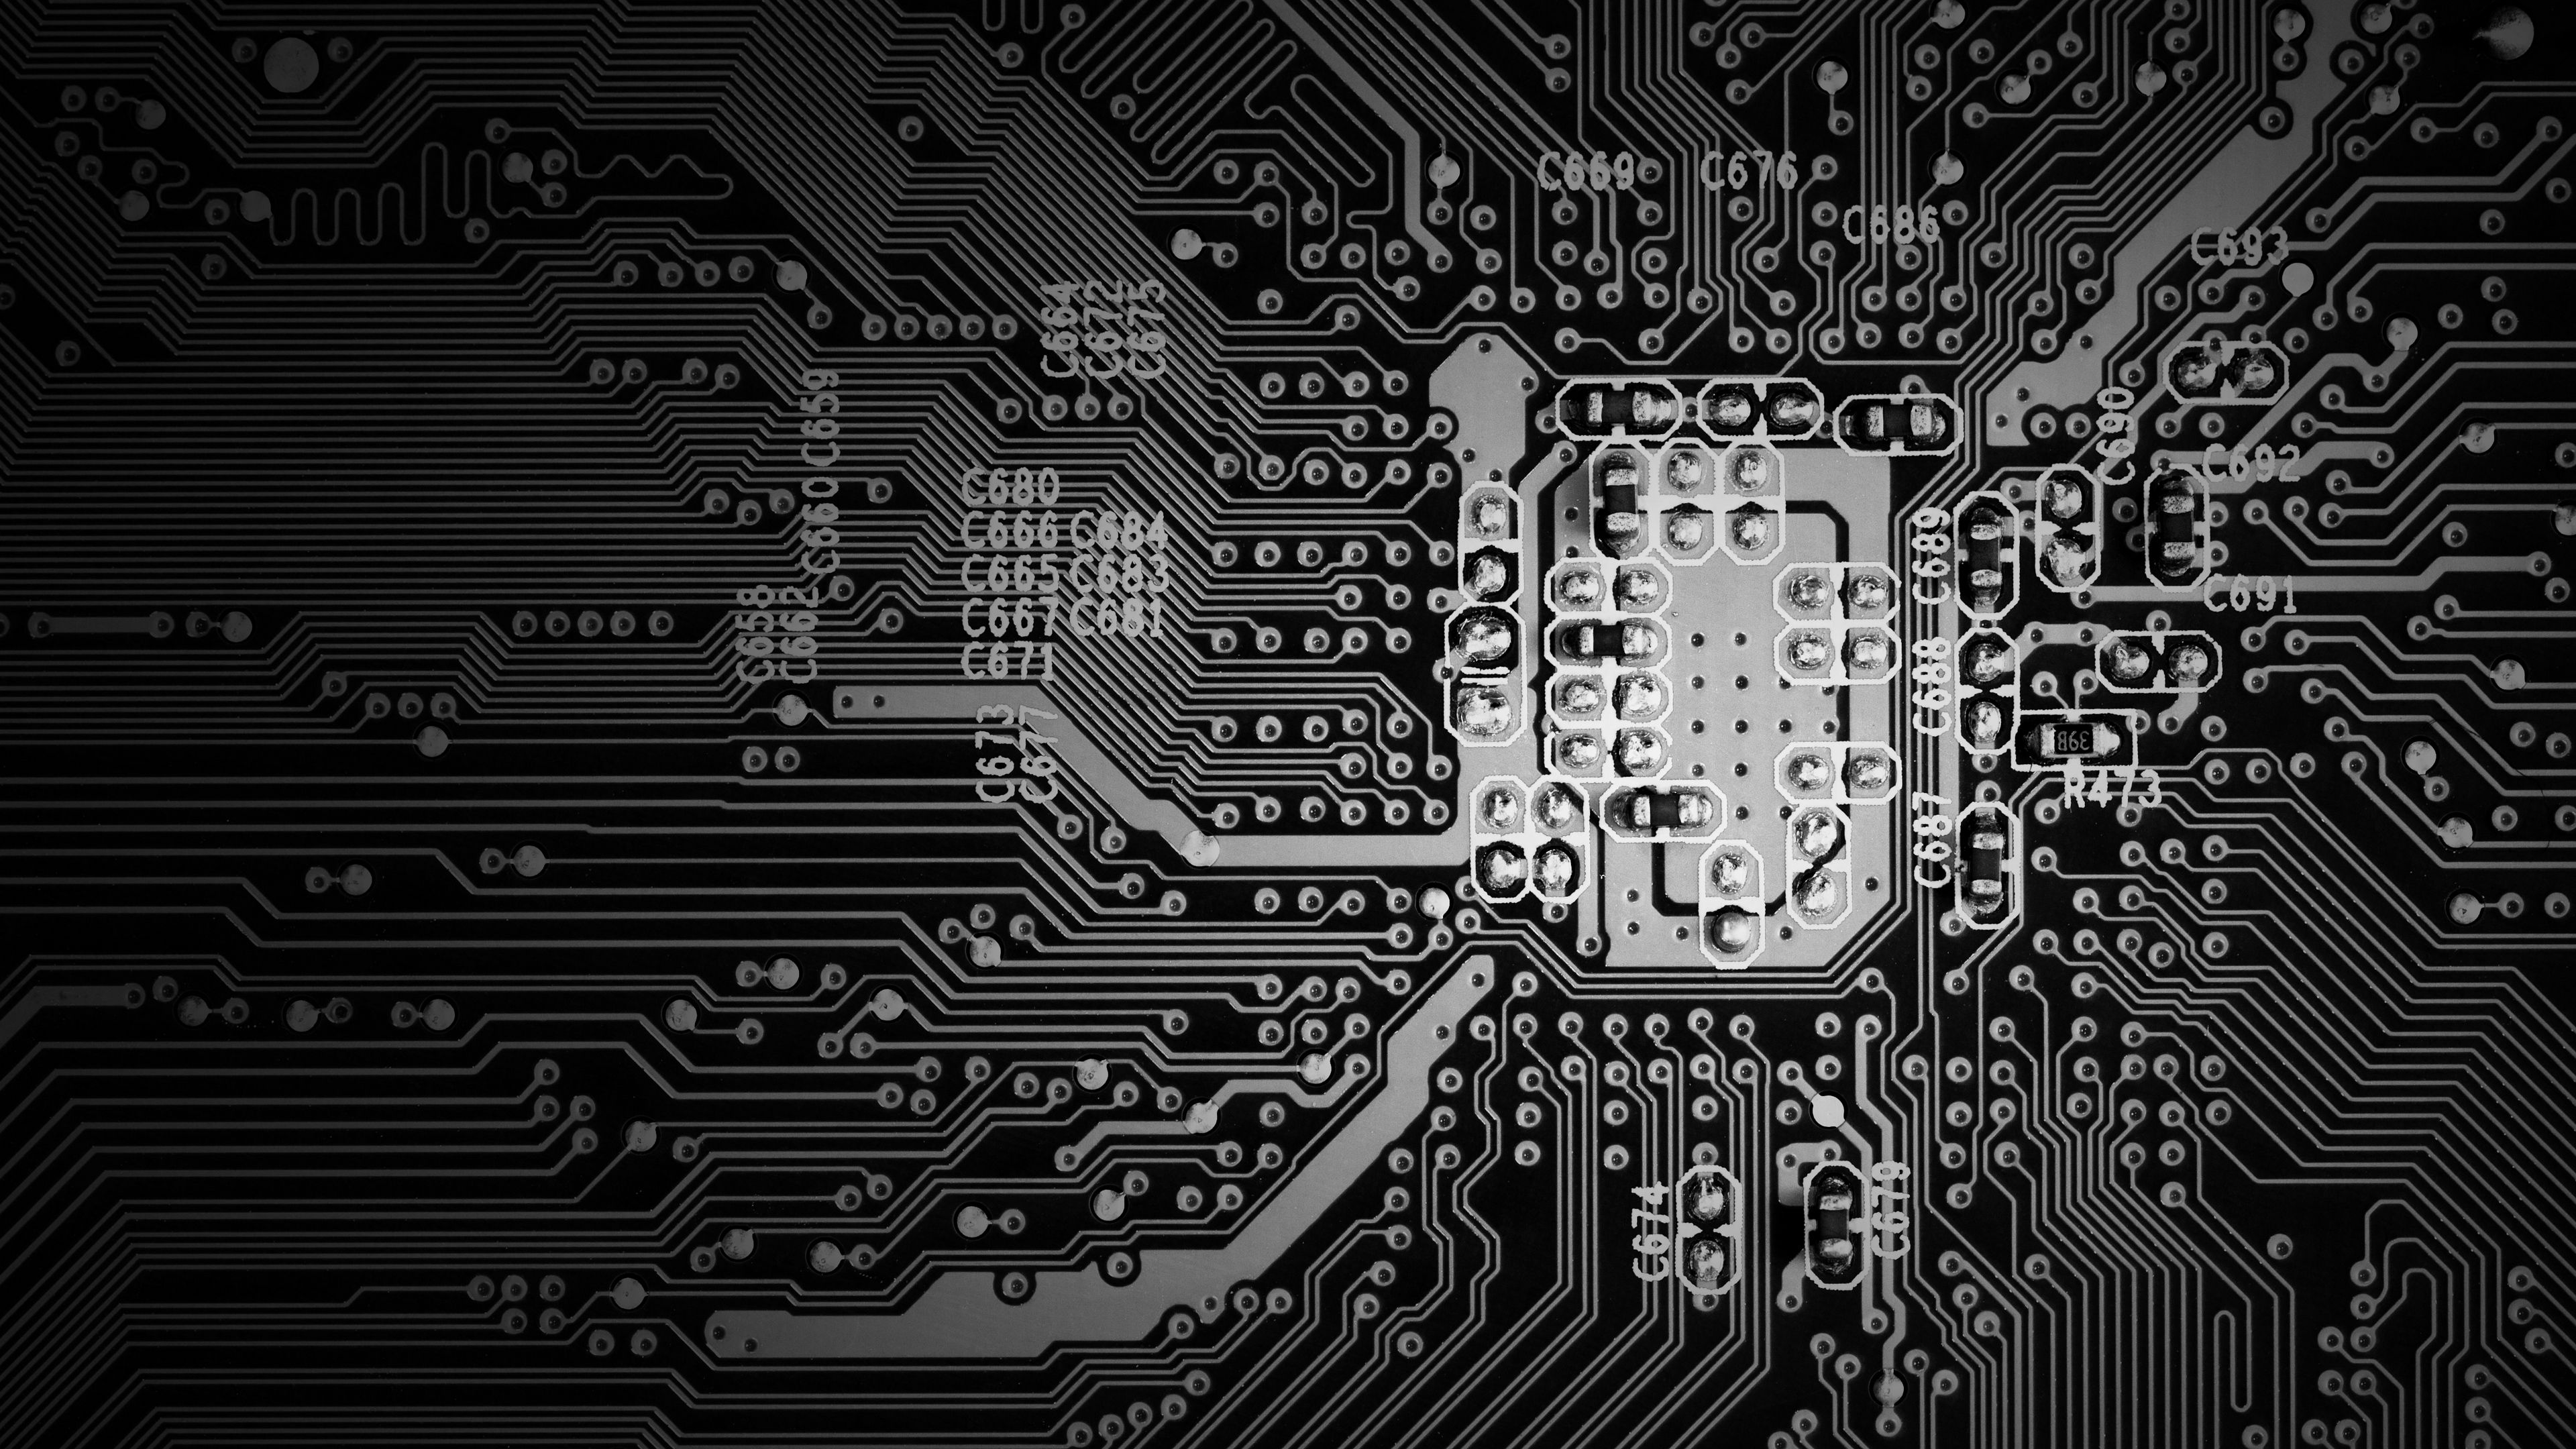 Hand on circuit board wallpaper Vector Image  1807673  StockUnlimited